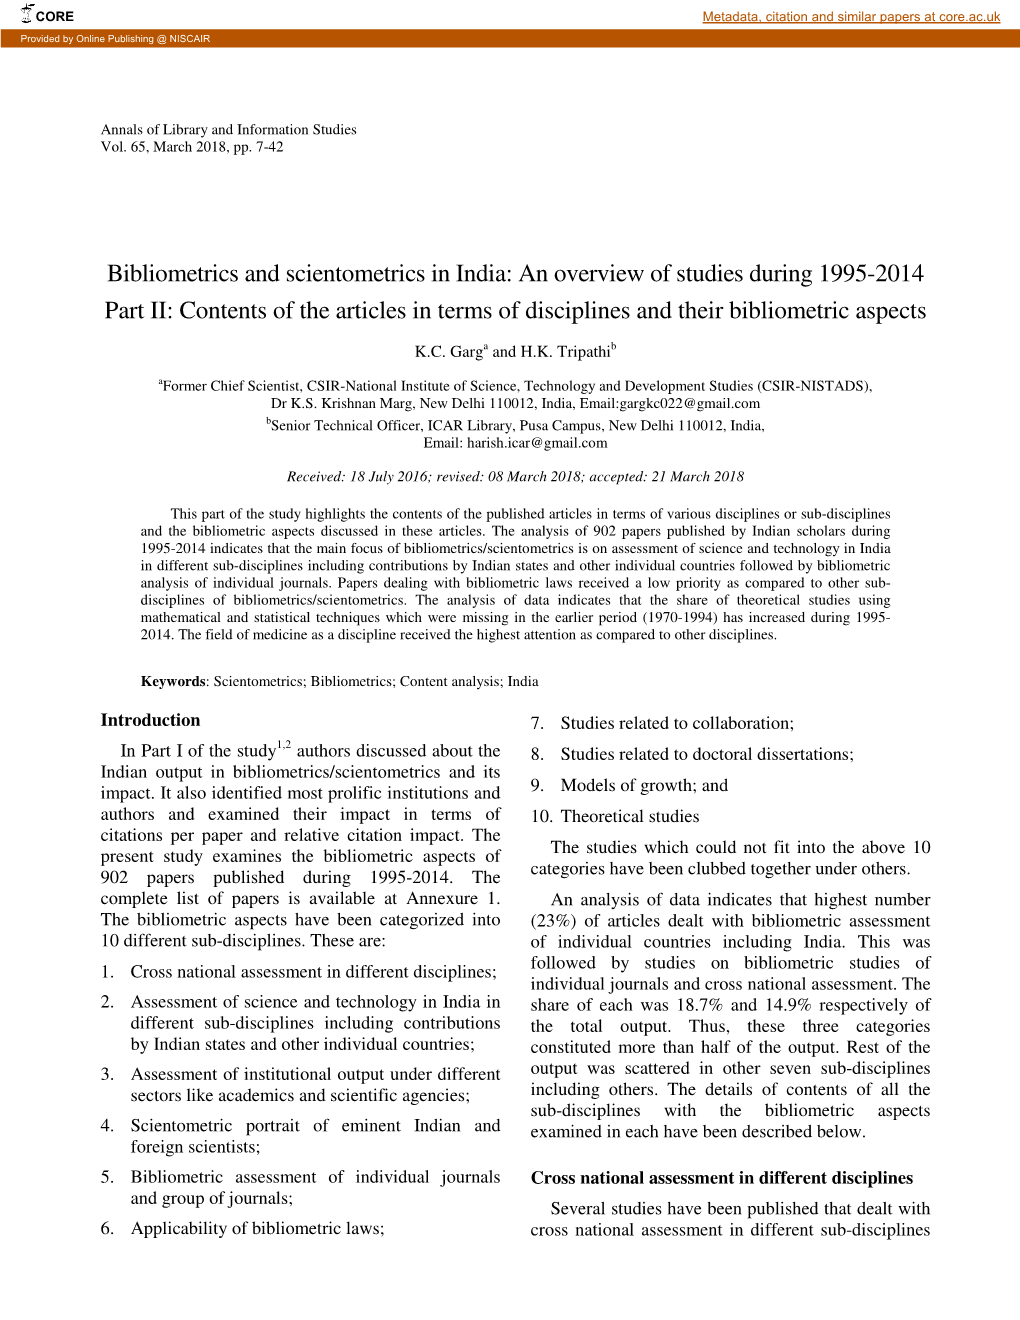 Bibliometrics and Scientometrics in India: an Overview of Studies During 1995-2014 Part II